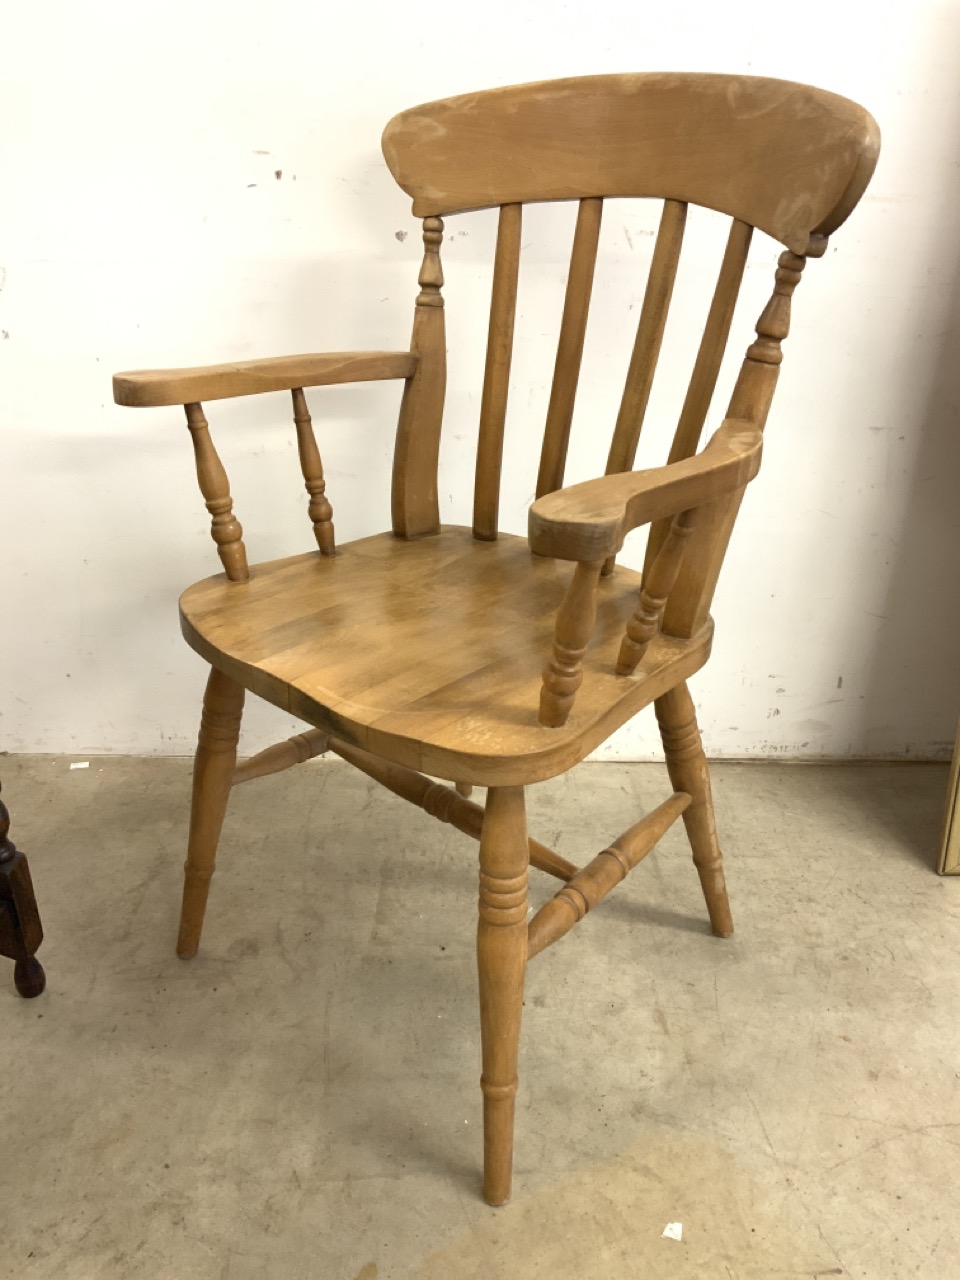 A hardwood smorkers bow style slat back chair also with an early 20th century barley twist table. - Image 2 of 4